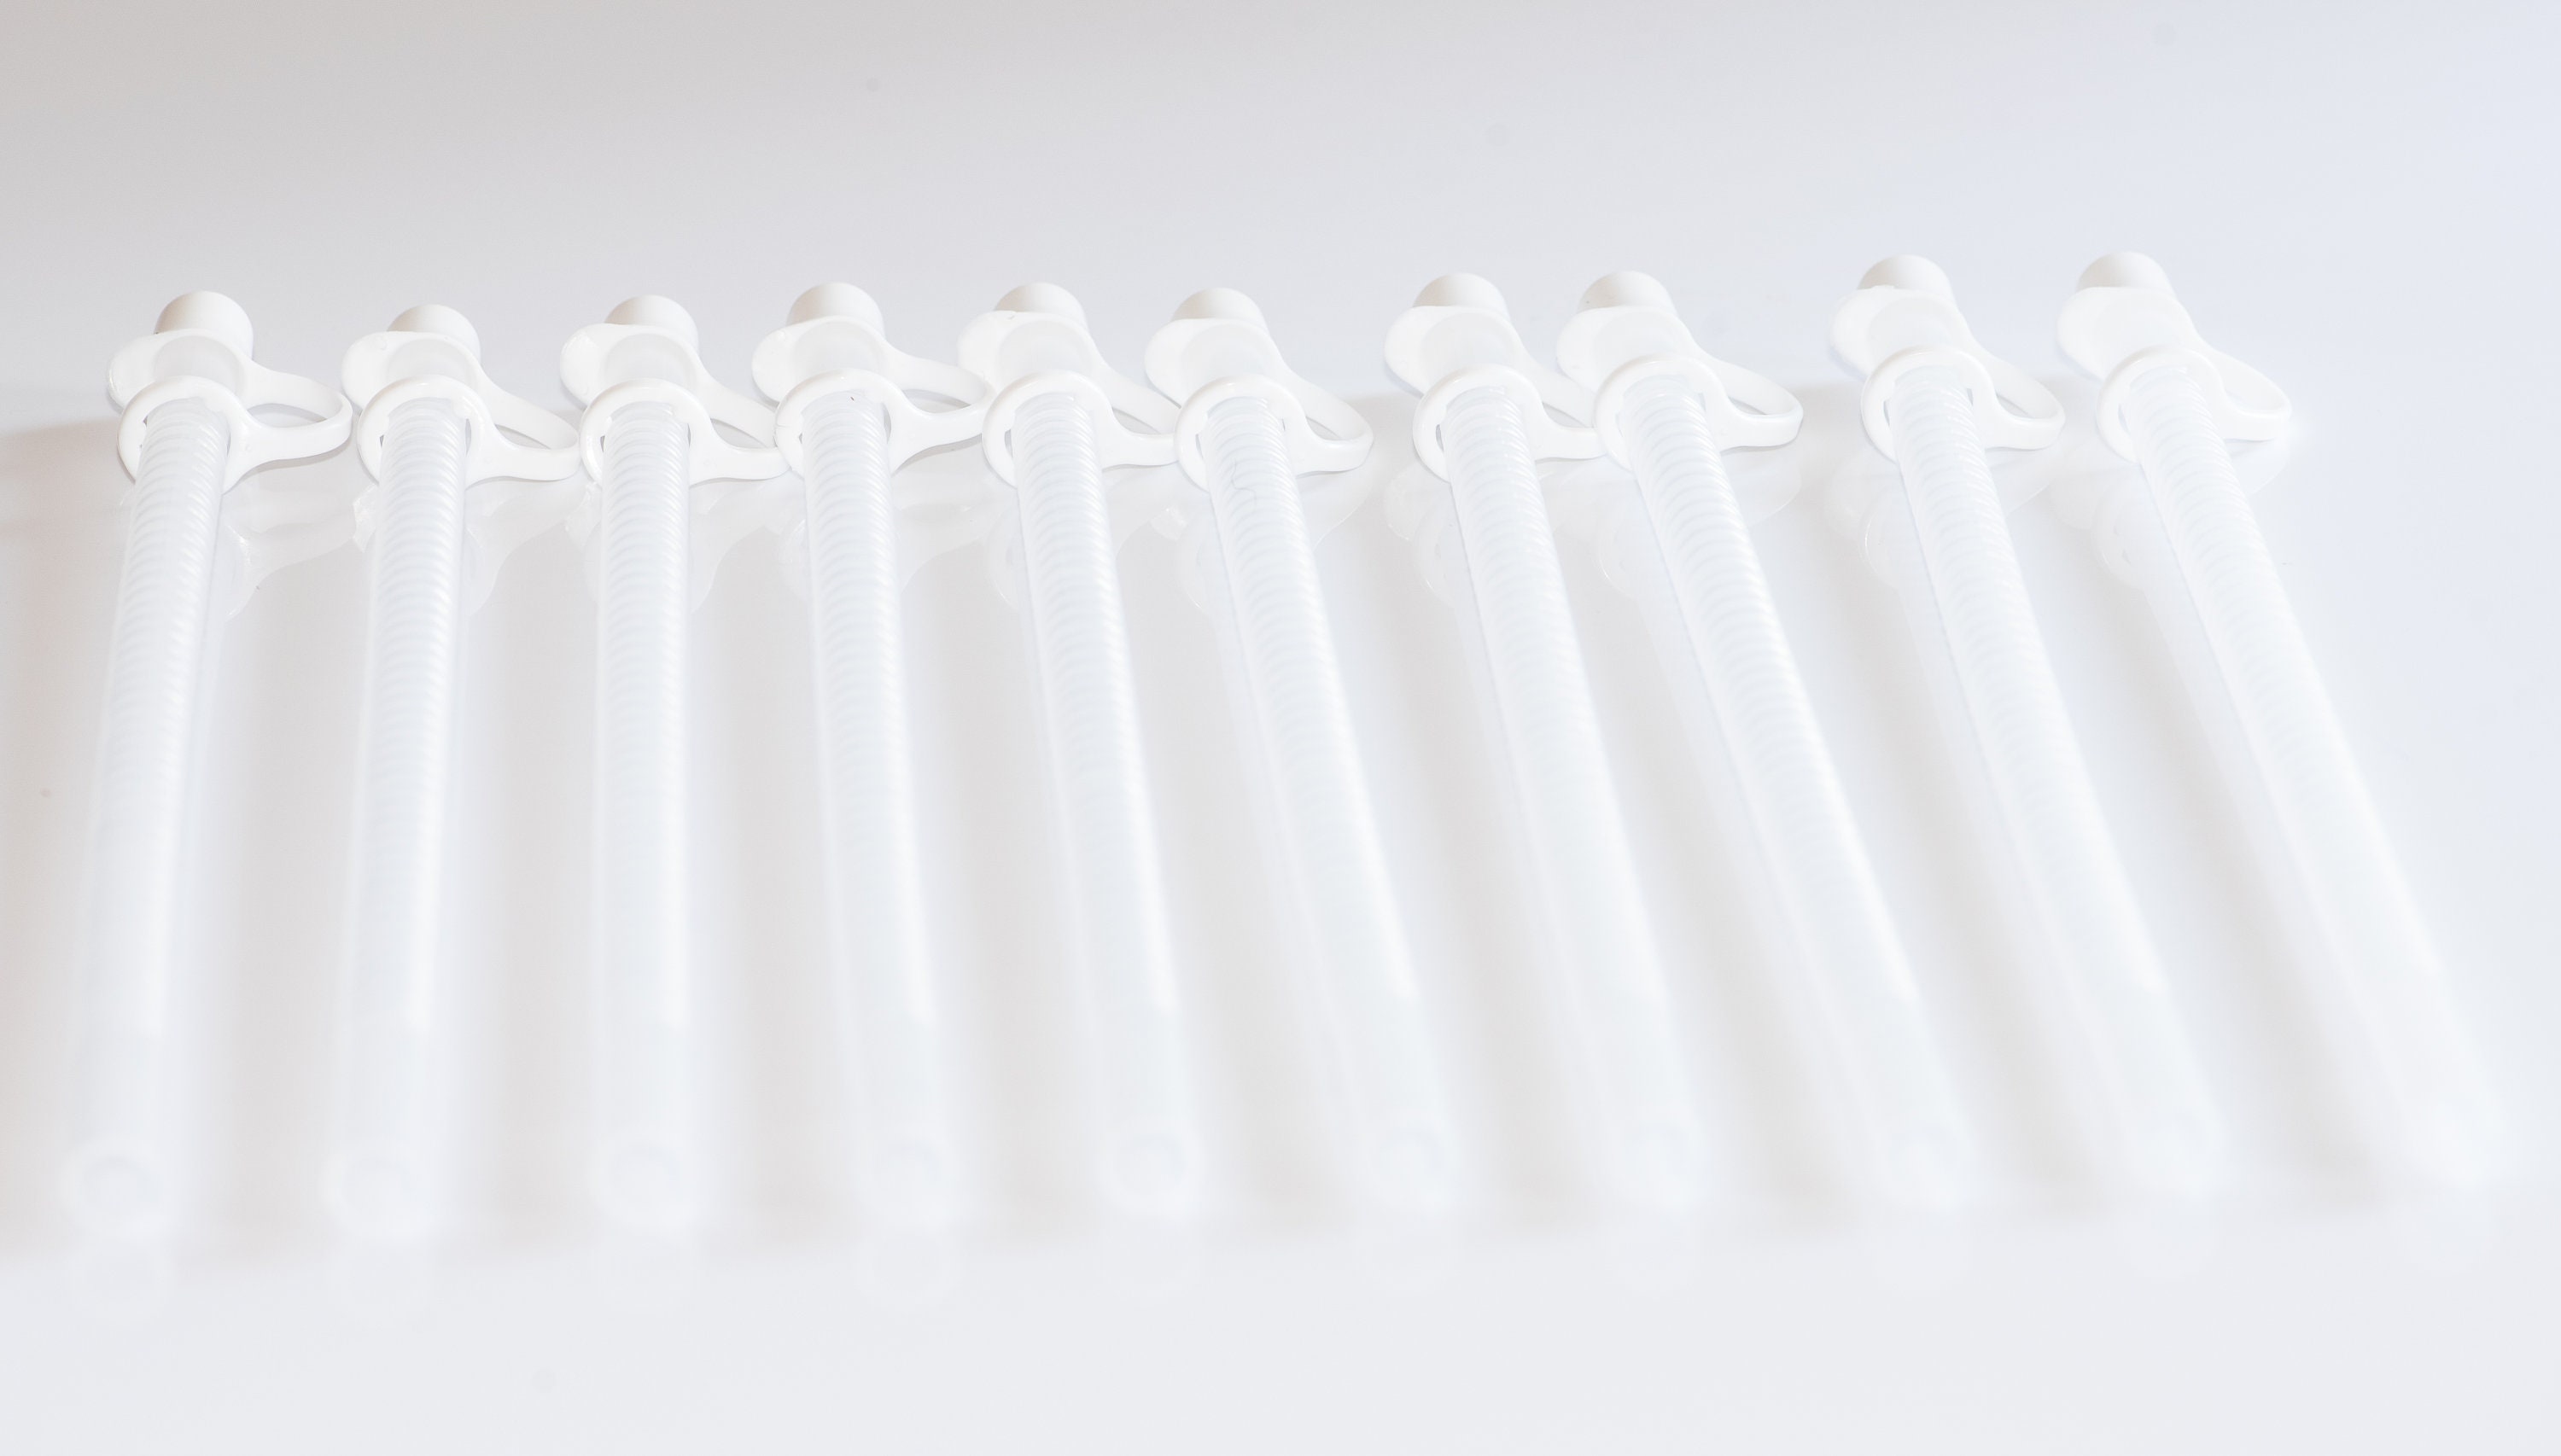 9 Inch Long Flexible Reusable Straws with White Straw Caps Free Shipping Set of 10